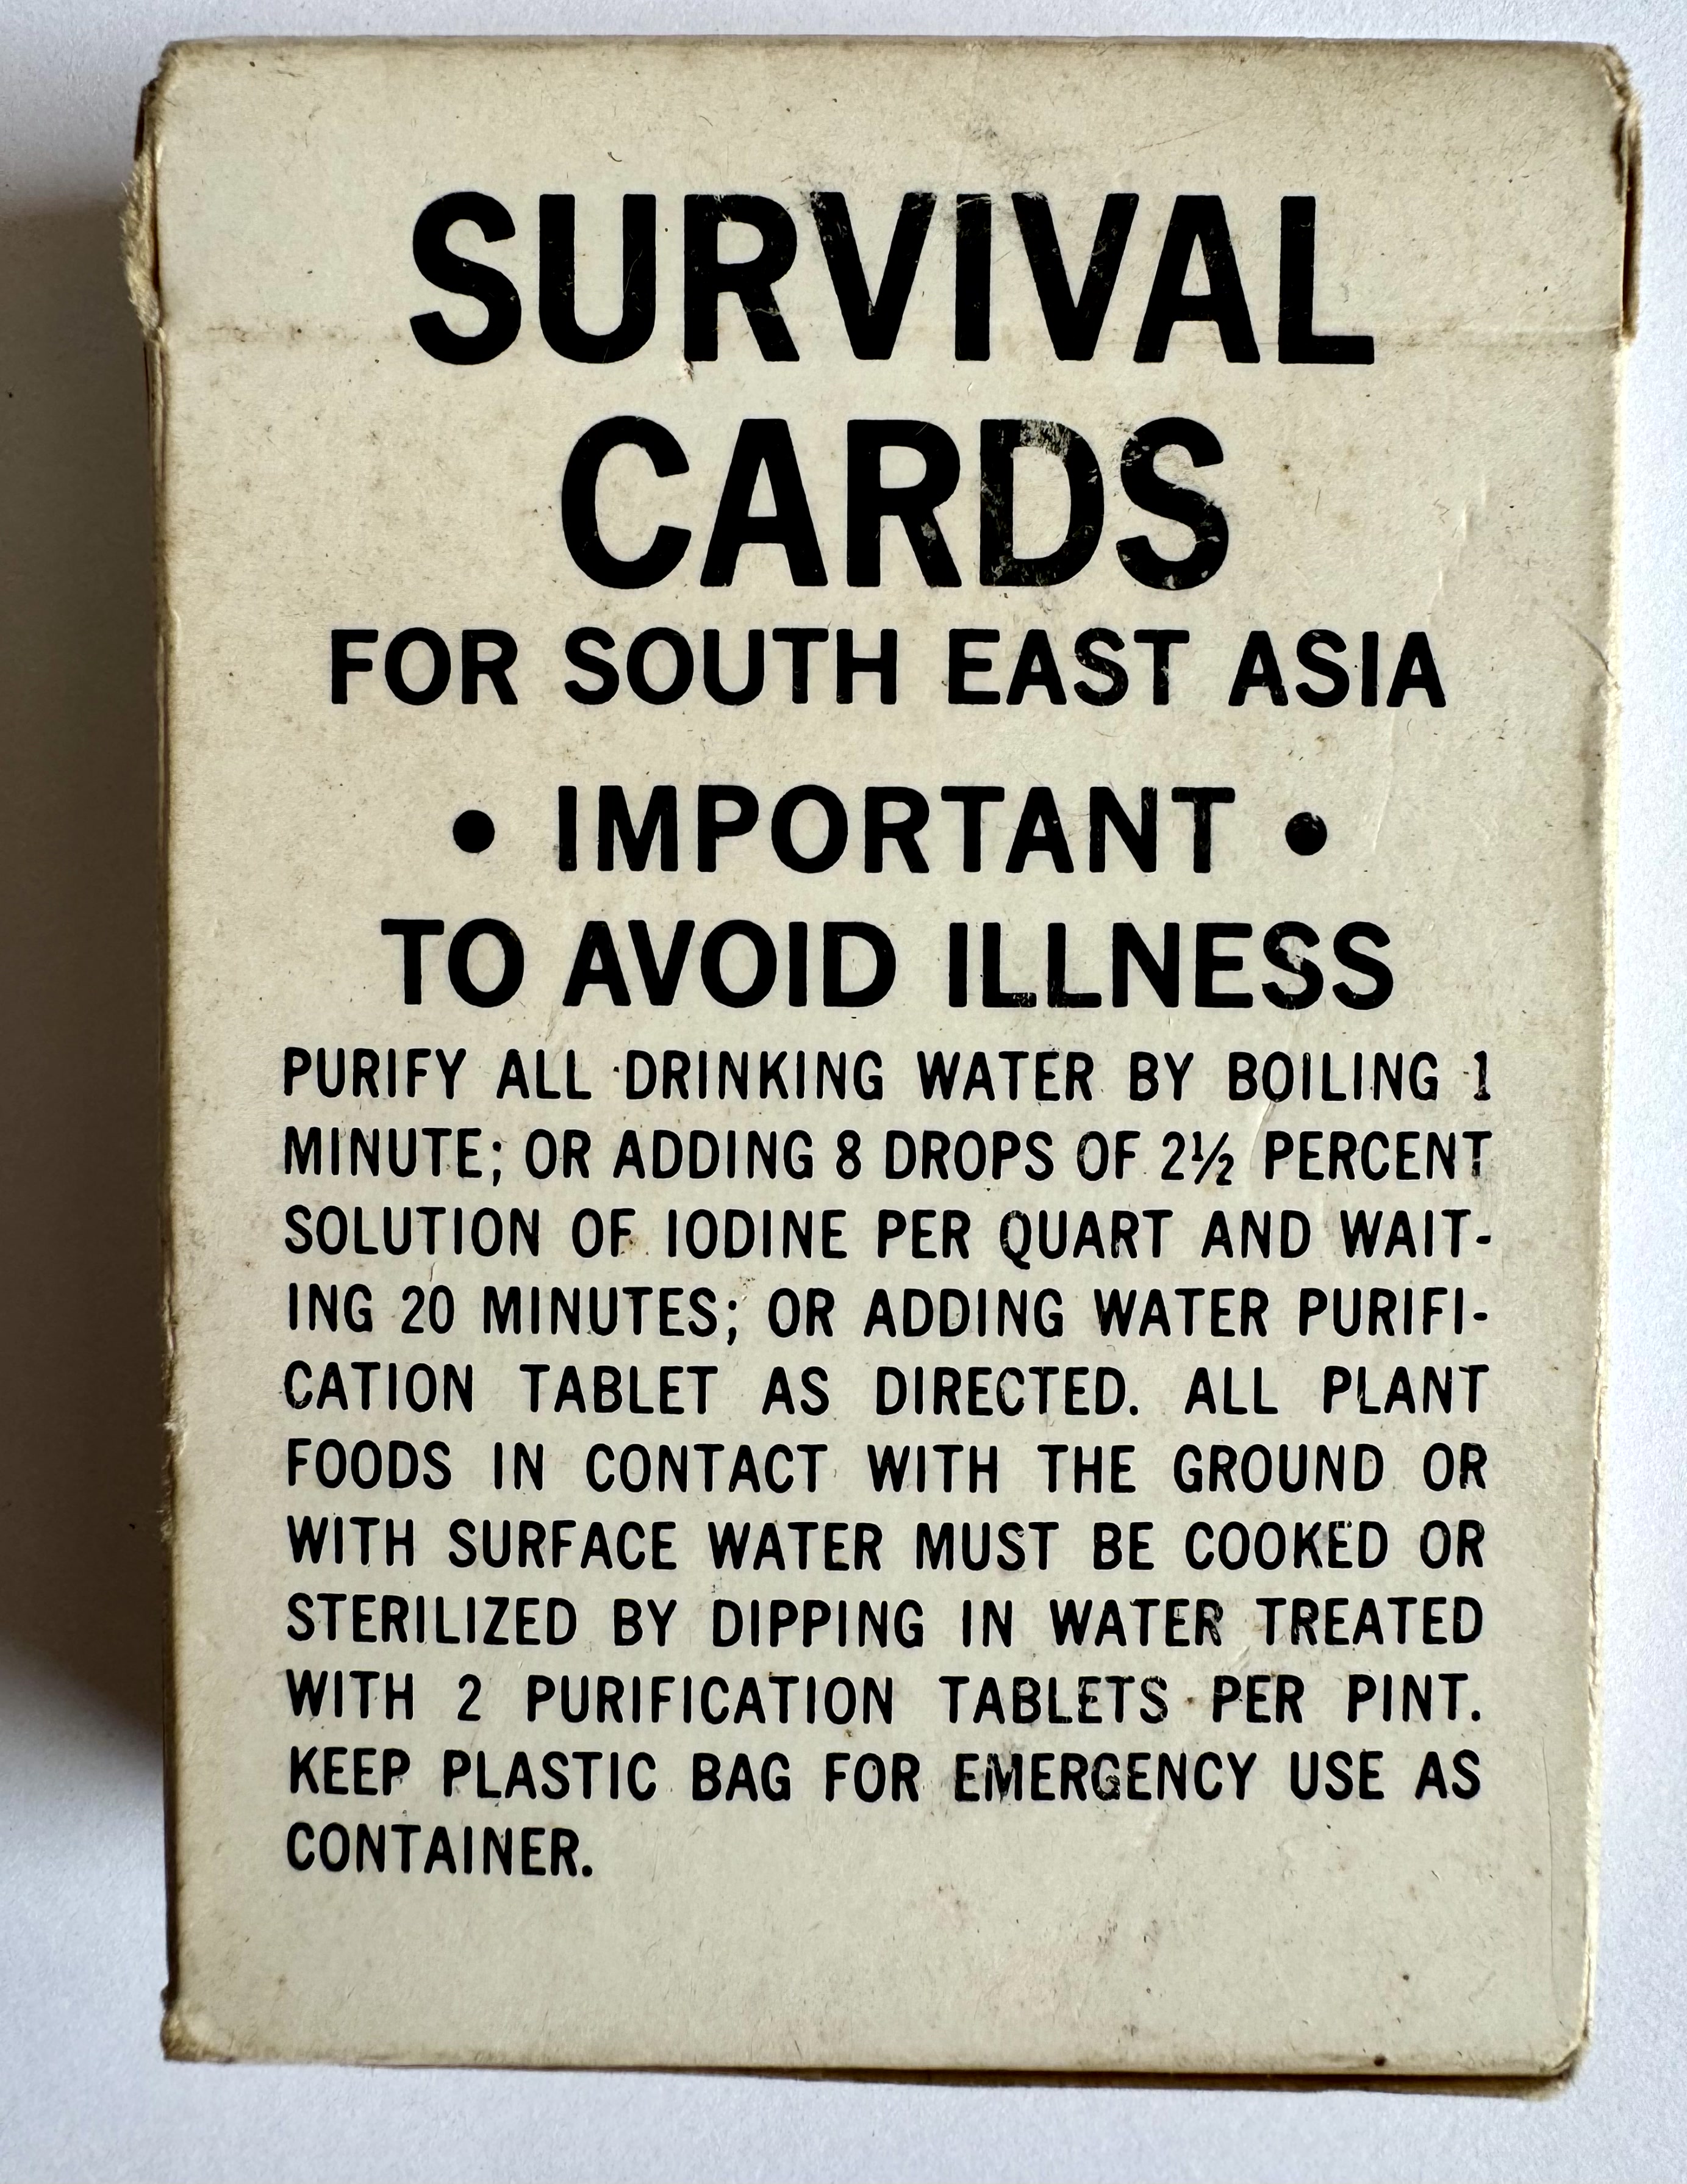 Survival Cards for South East Asia